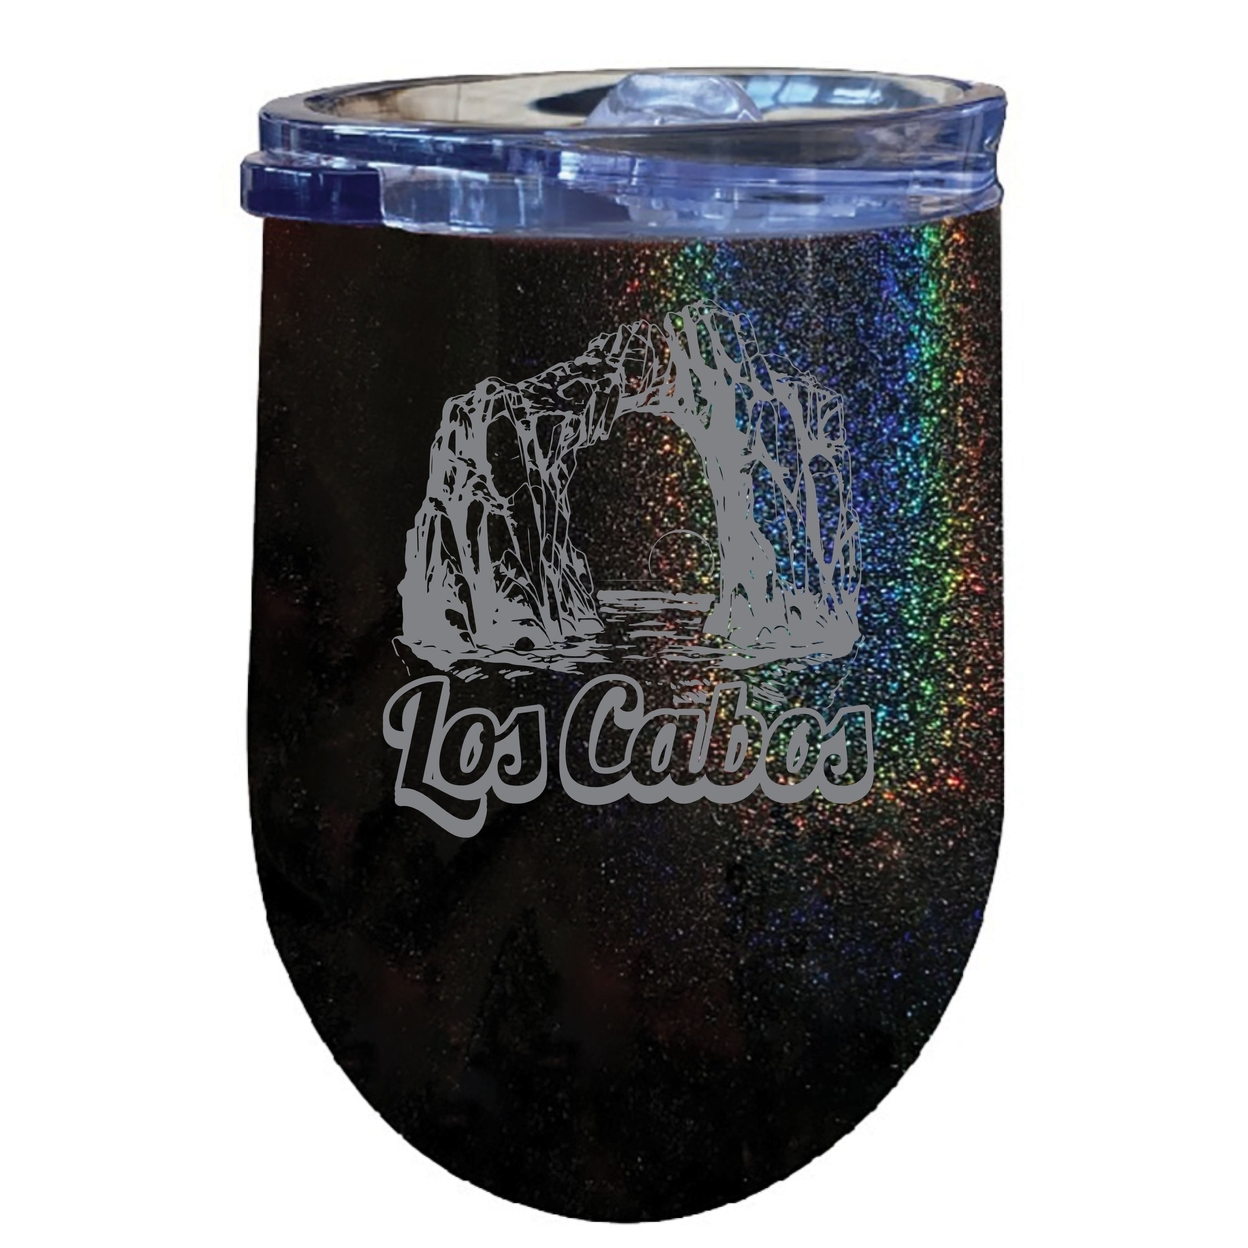 Los Cabos Mexico Souvenir 12 Oz Engraved Insulated Wine Stainless Steel Tumbler - Purple,,Single Unit